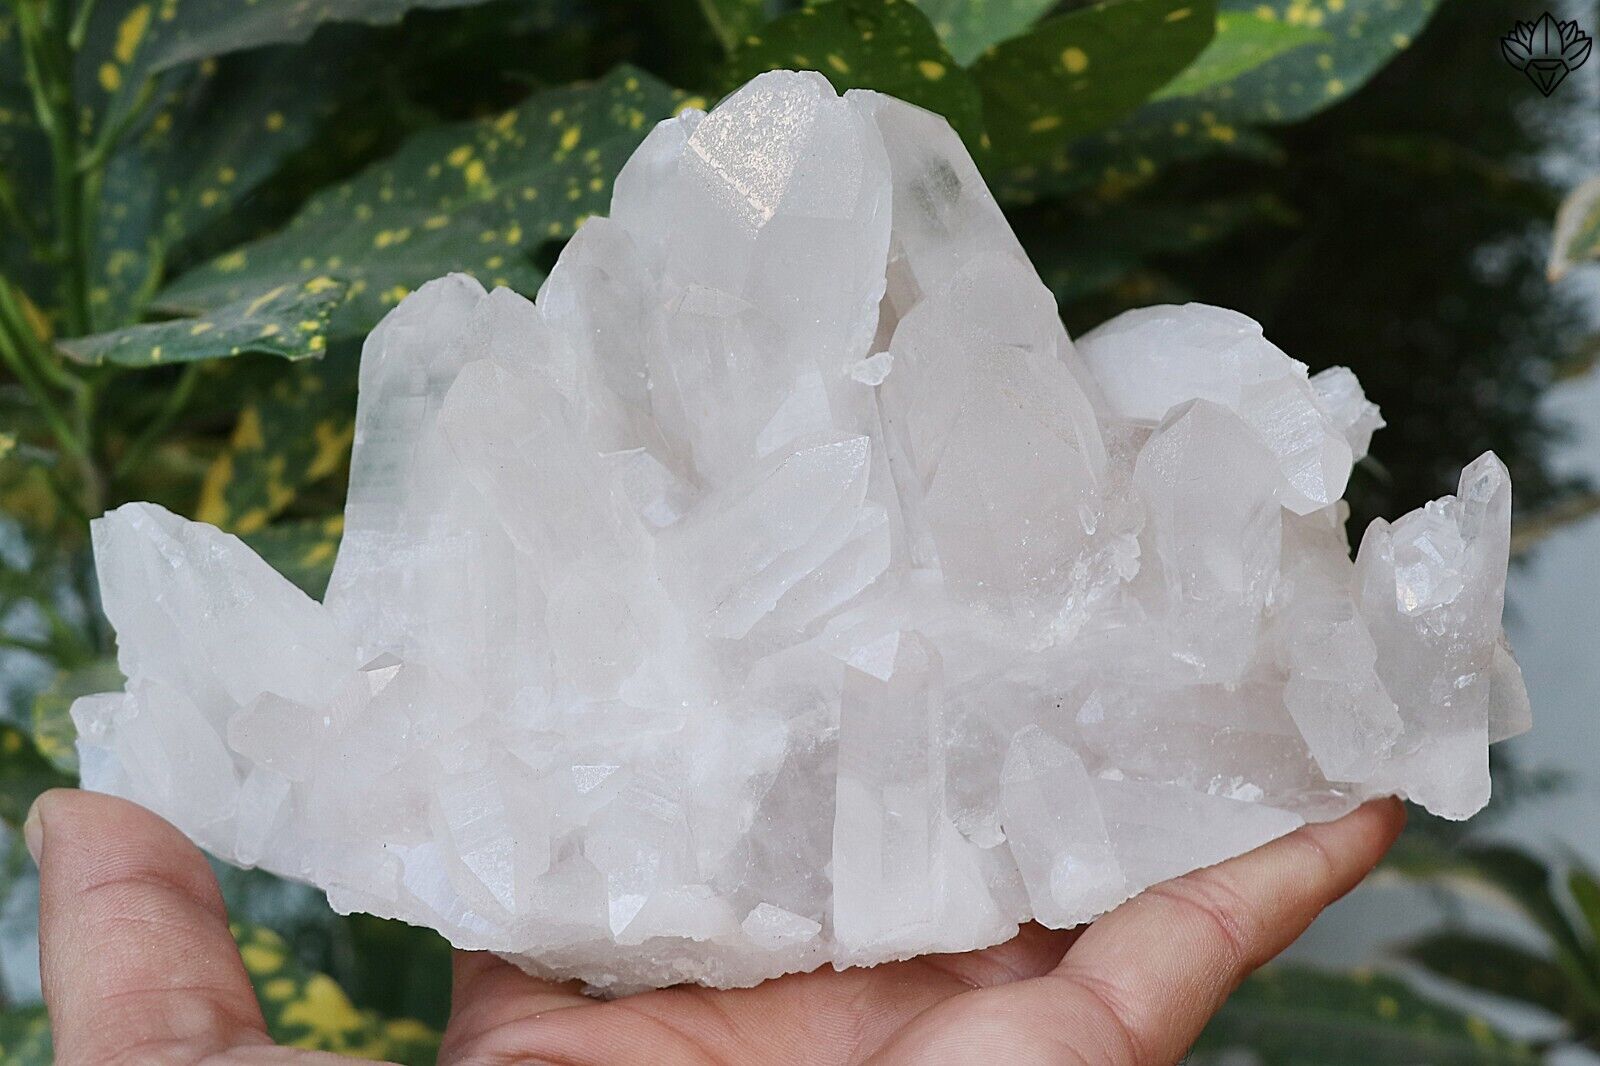 AAA+++ Natural Pointed Healing Cluster White Himalayan Quartz 763gm Raw Specimen